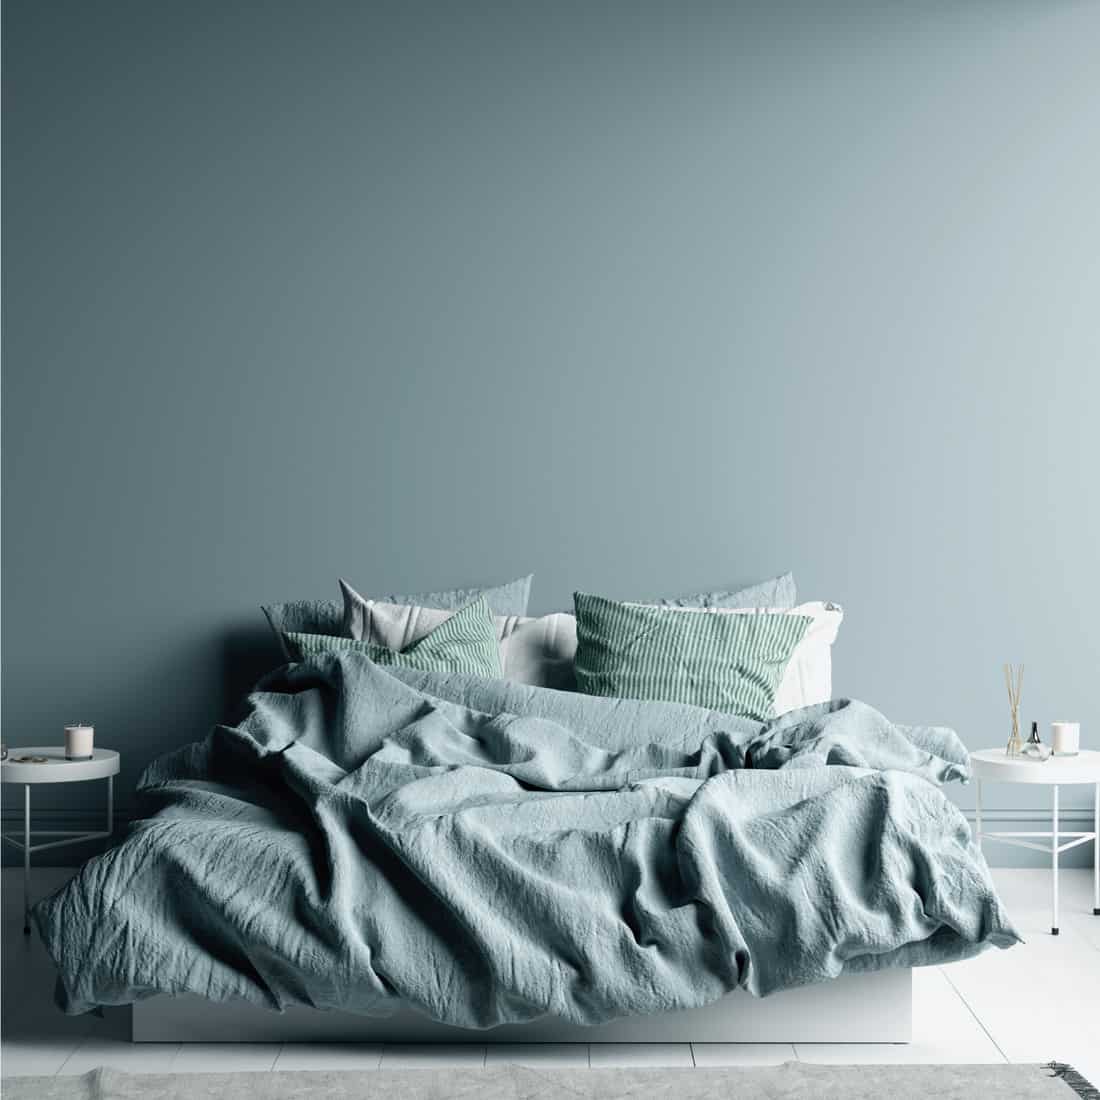 Dark cold blue bedroom interior with linen sheet on bed